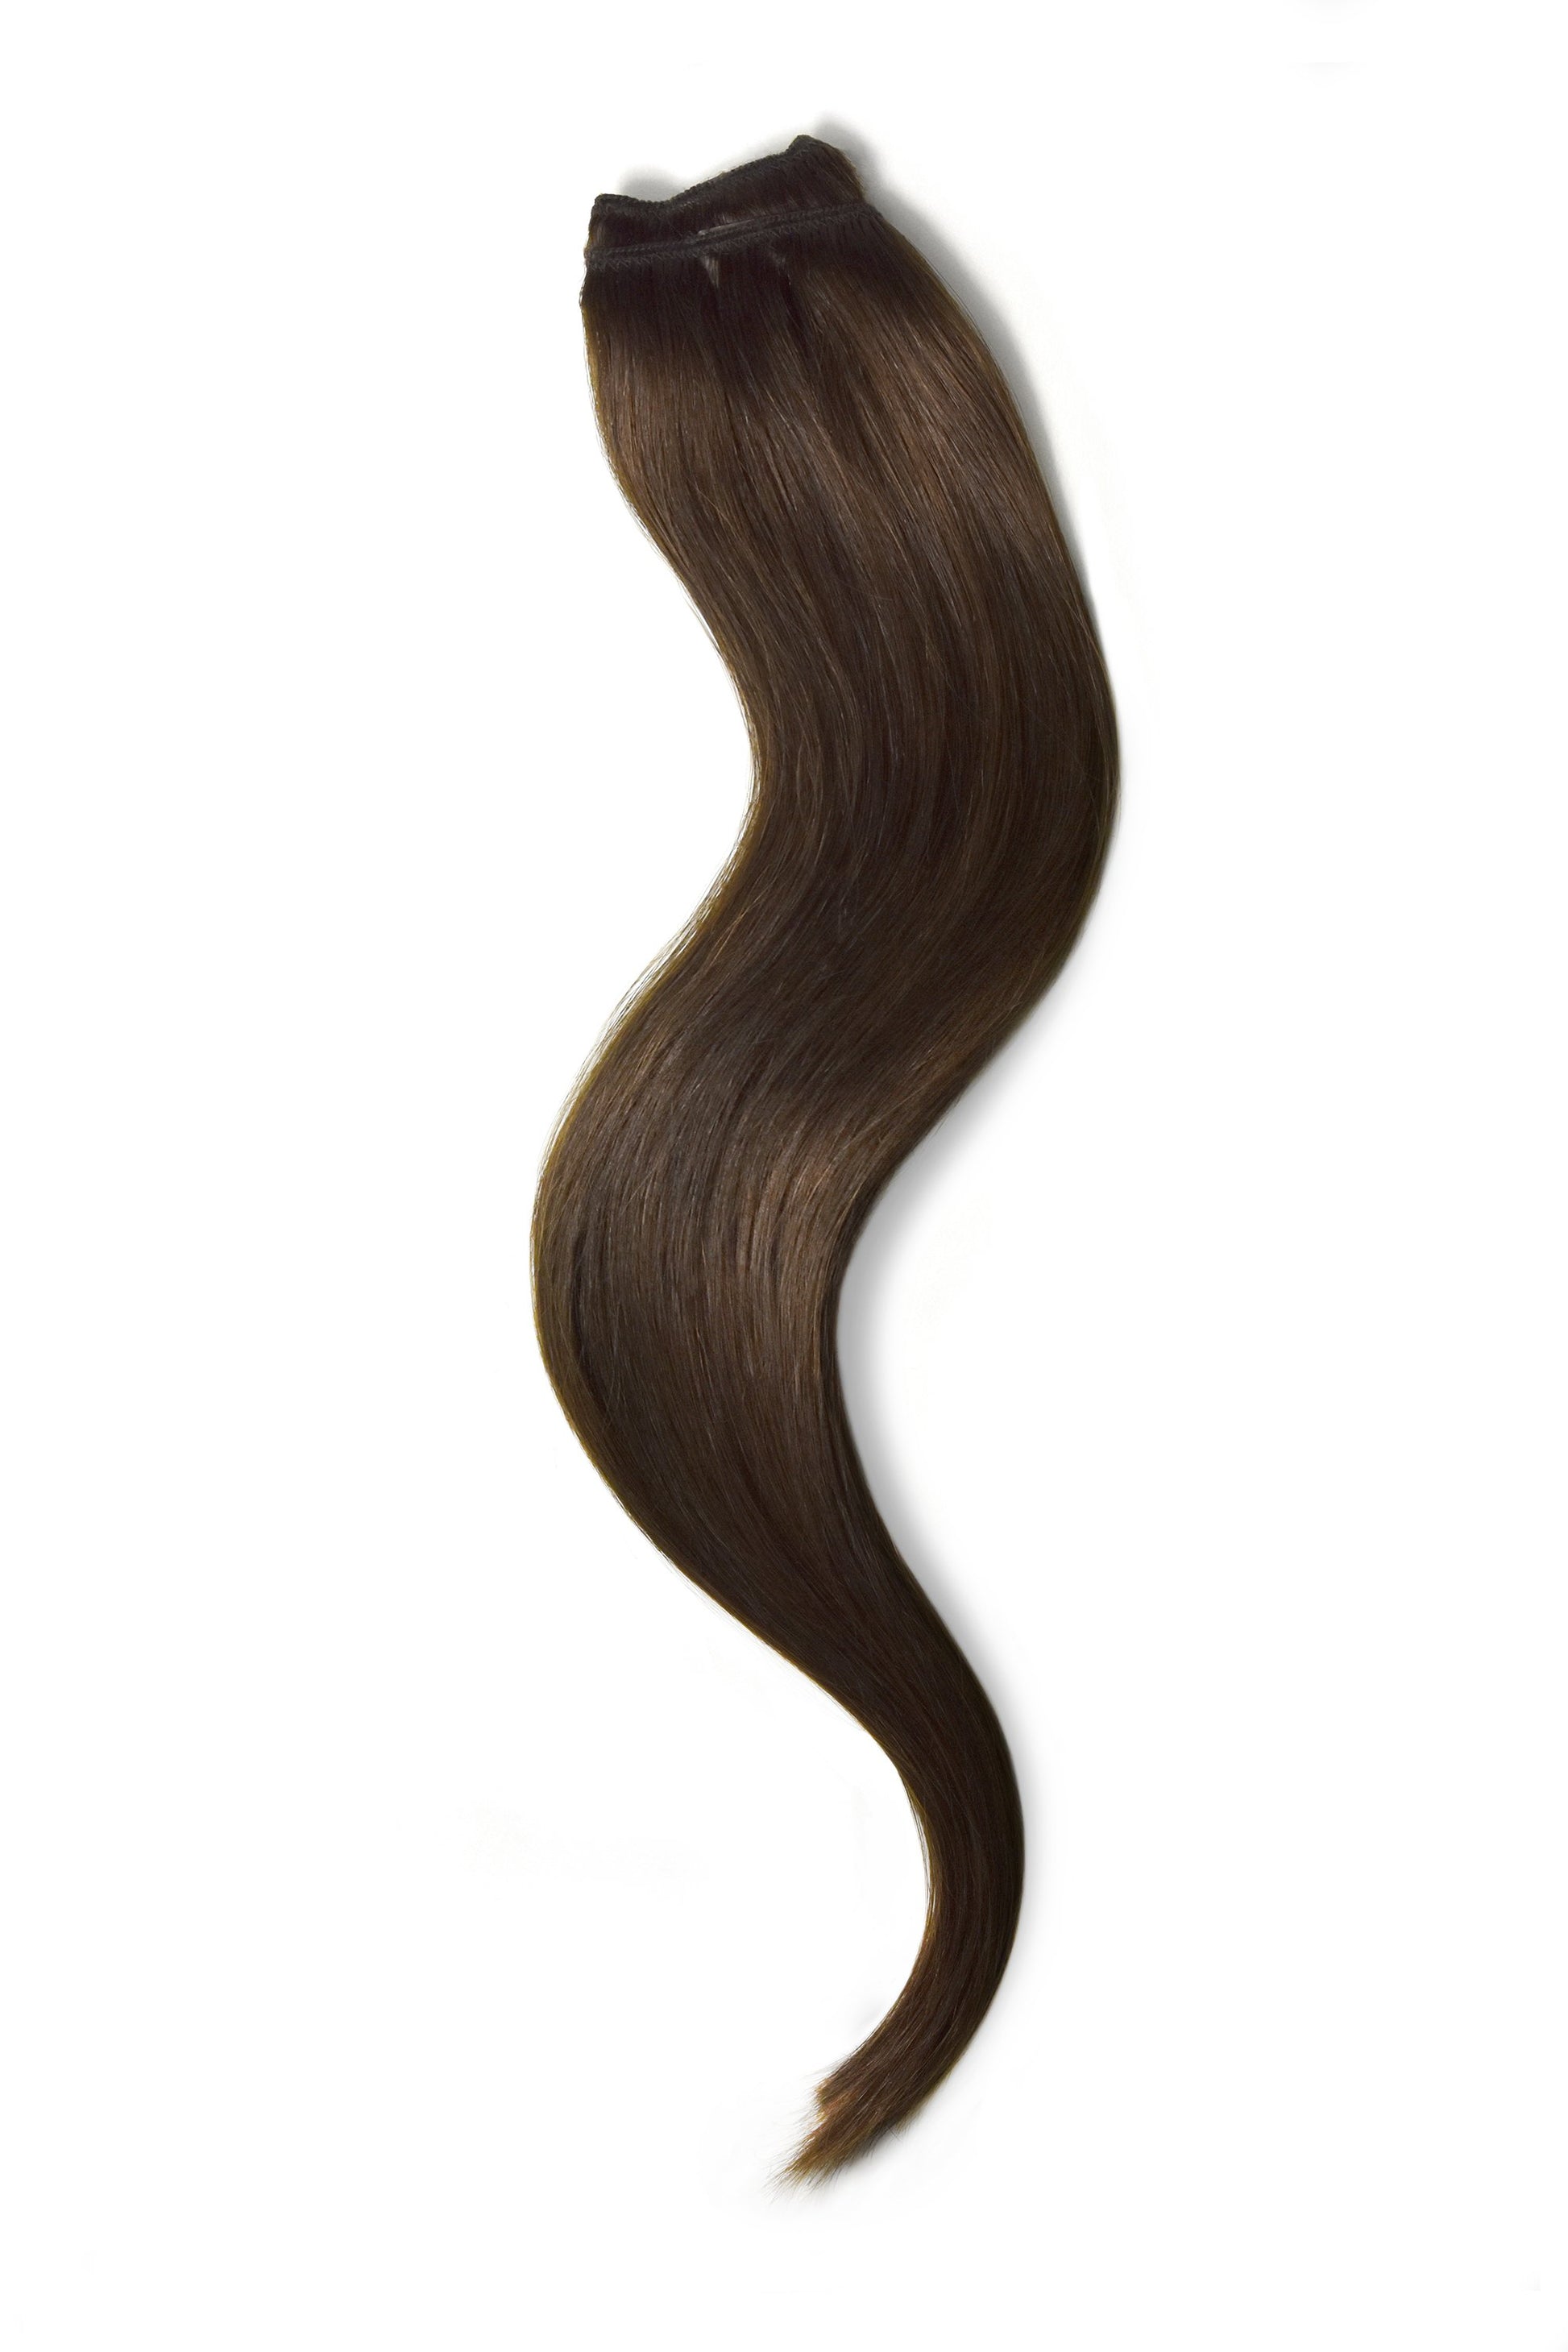 One Piece Top-up Remy Clip in Human Hair Extensions - Medium Brown (#4)